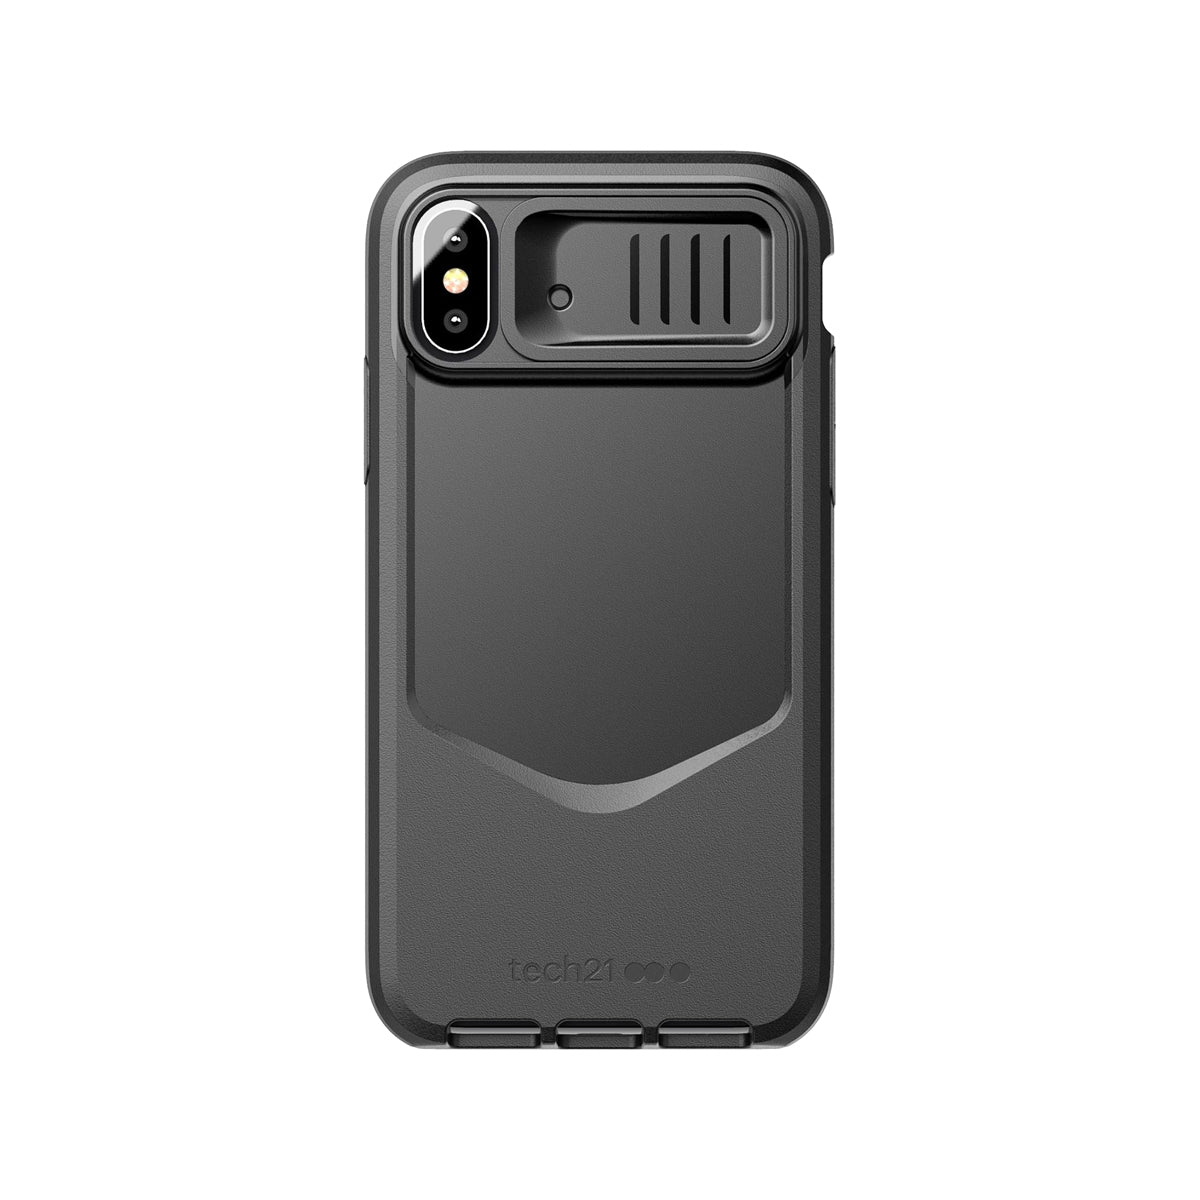 Tech21 Evo Max Phone Case for iPhone Xs - Black.